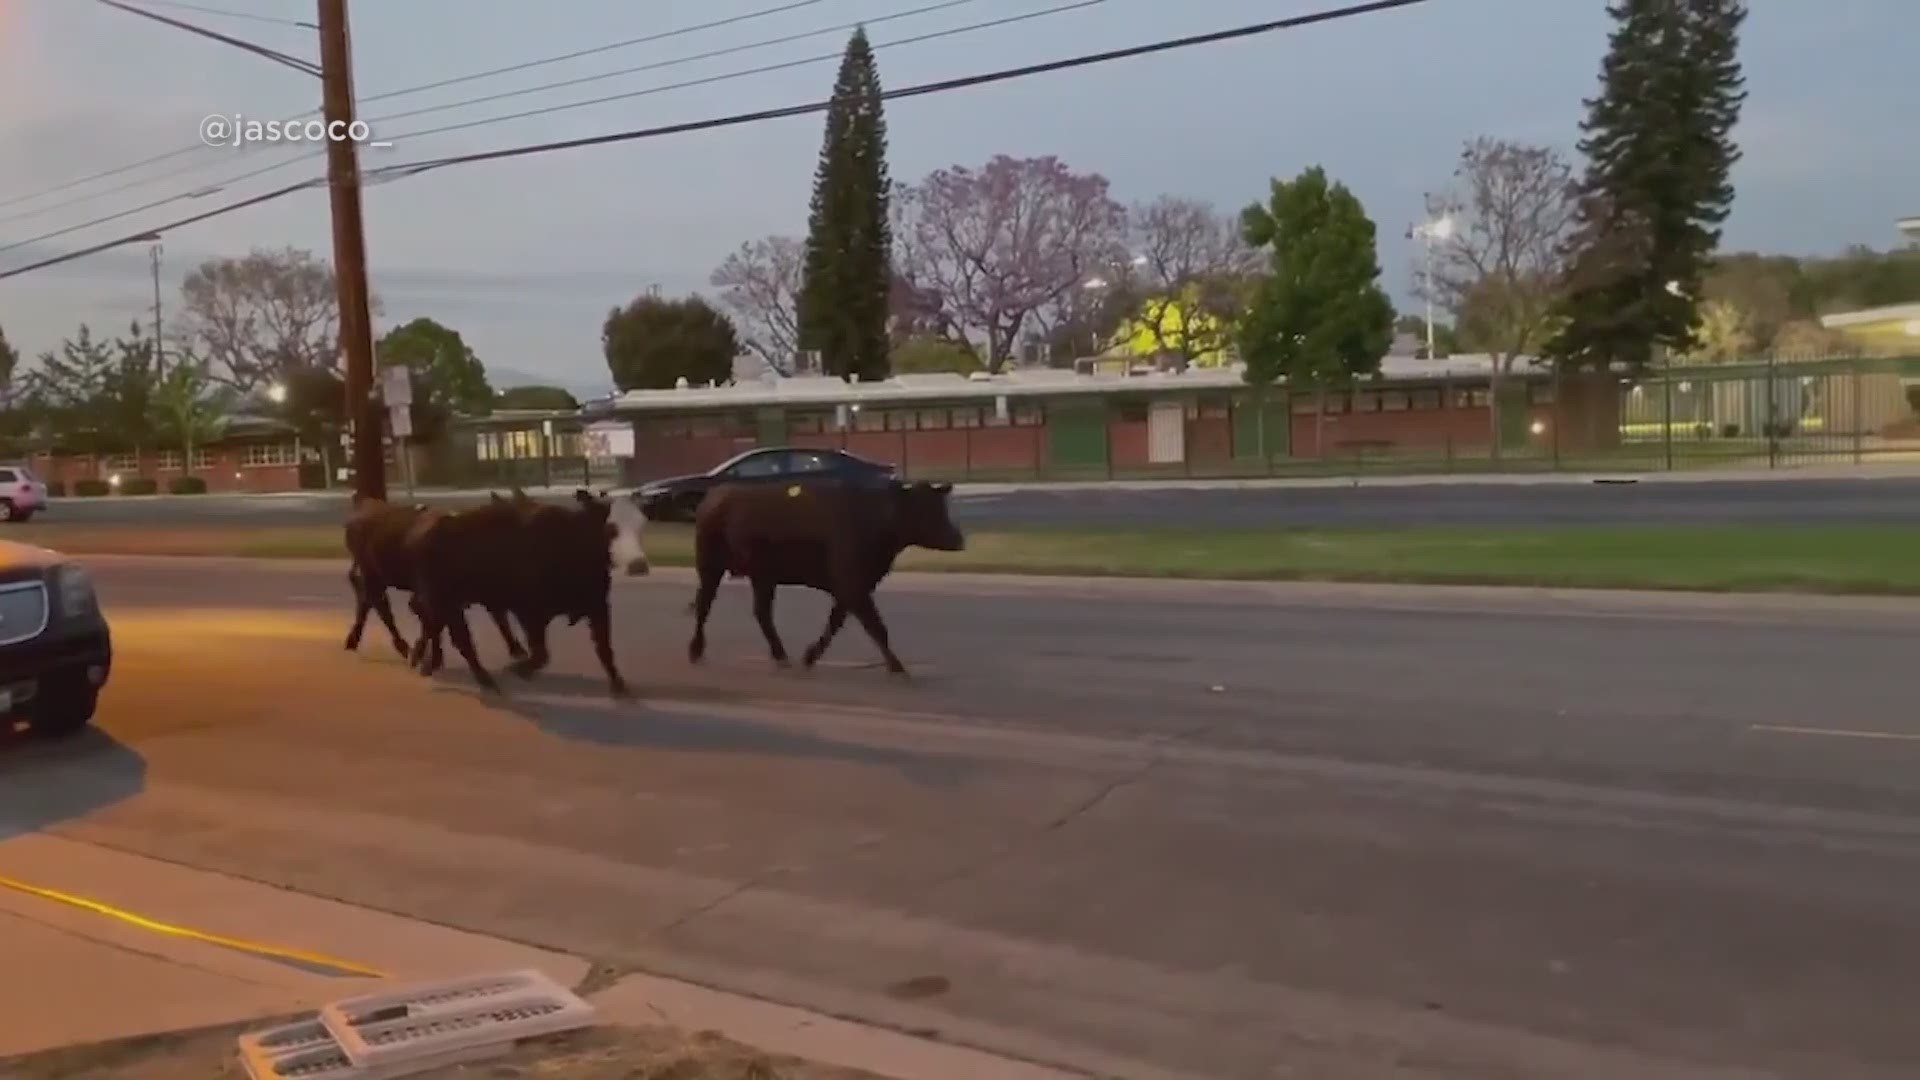 Forty cows escaped a slaughterhouse and ended up in a Los Angeles suburb where one was killed after charging a family.